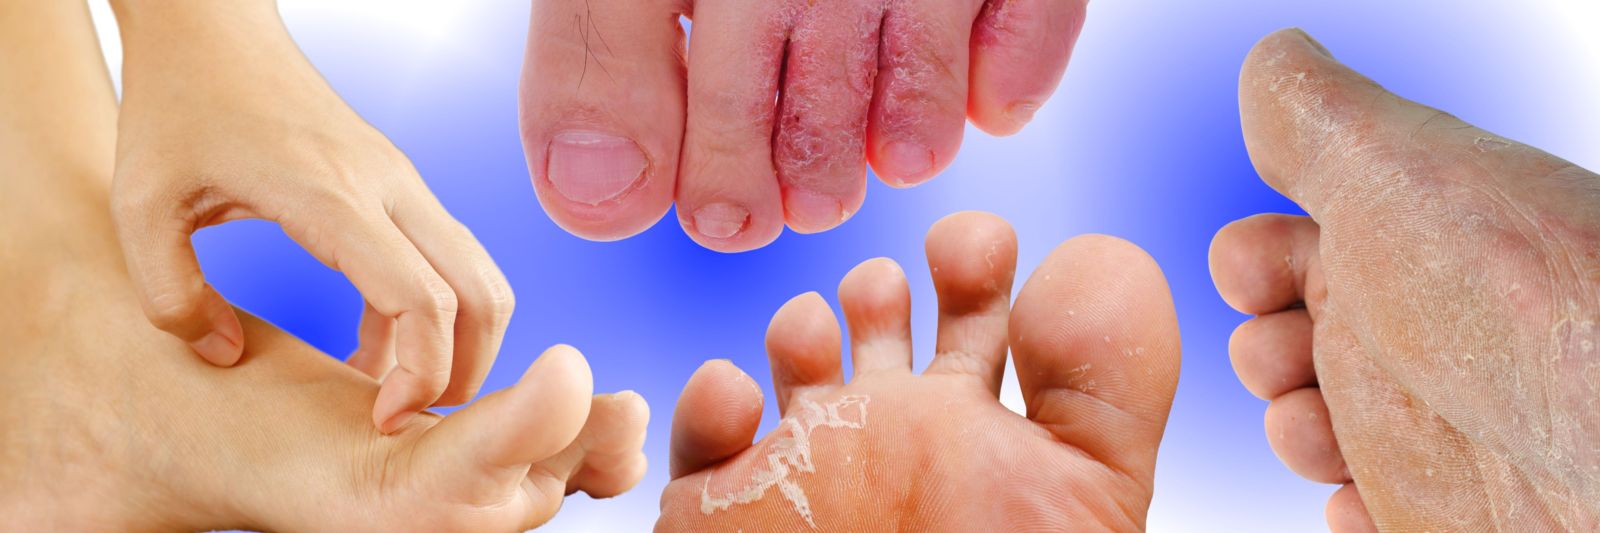 Why Do My Feet Itch At Night? | Sol Foot & Ankle Centers